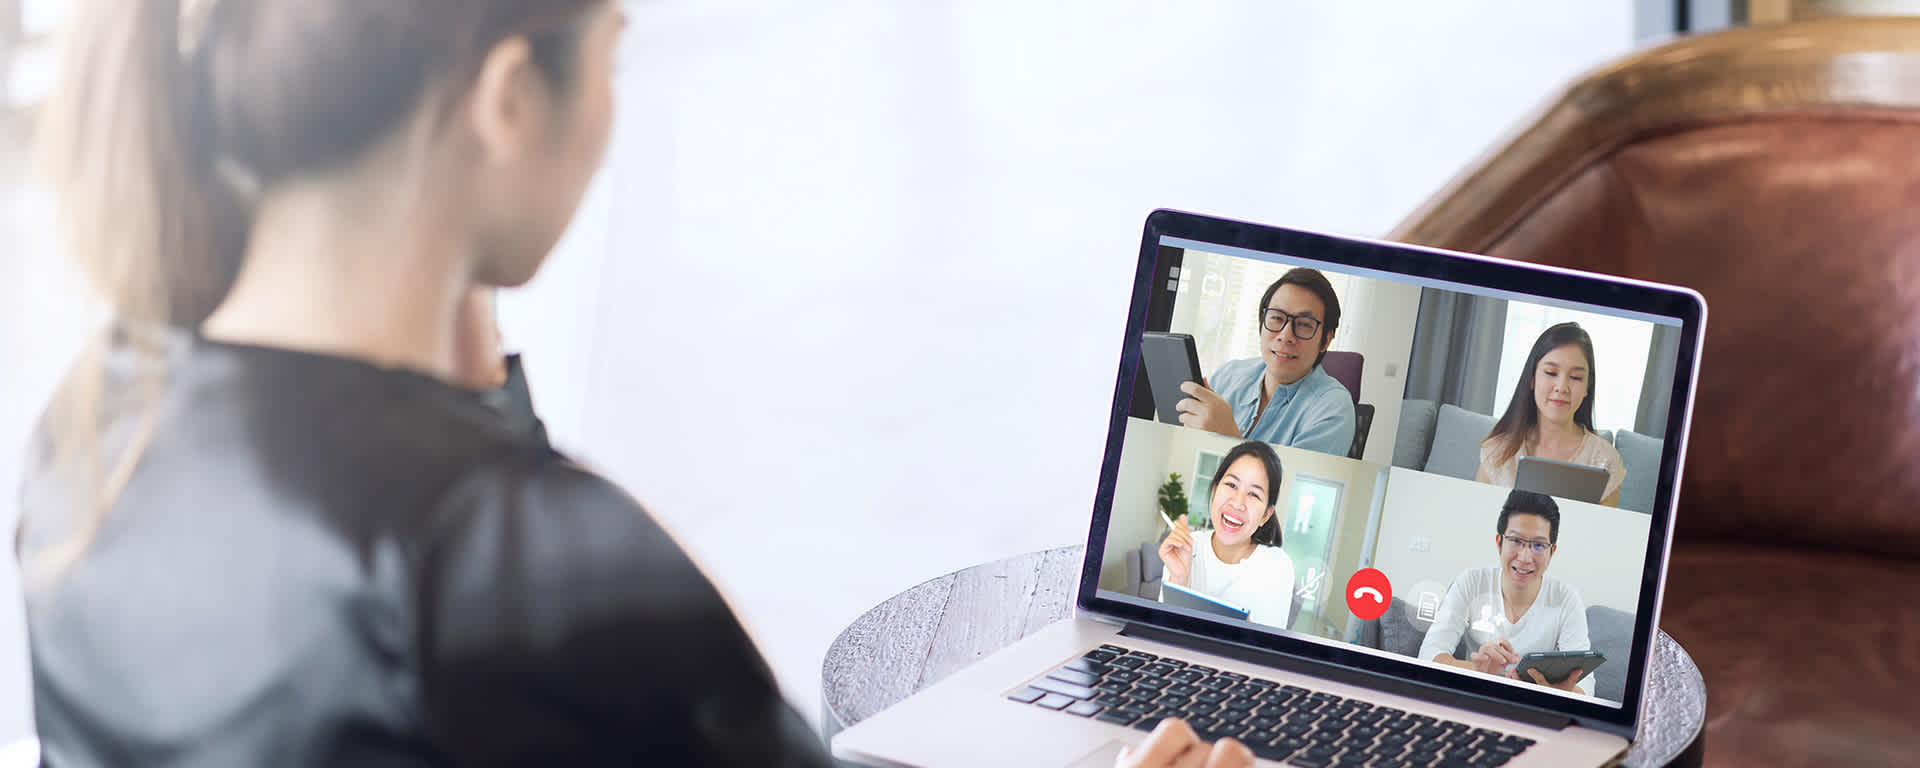 A young woman discusses the importance of cybersecurity on a video conference | Blog